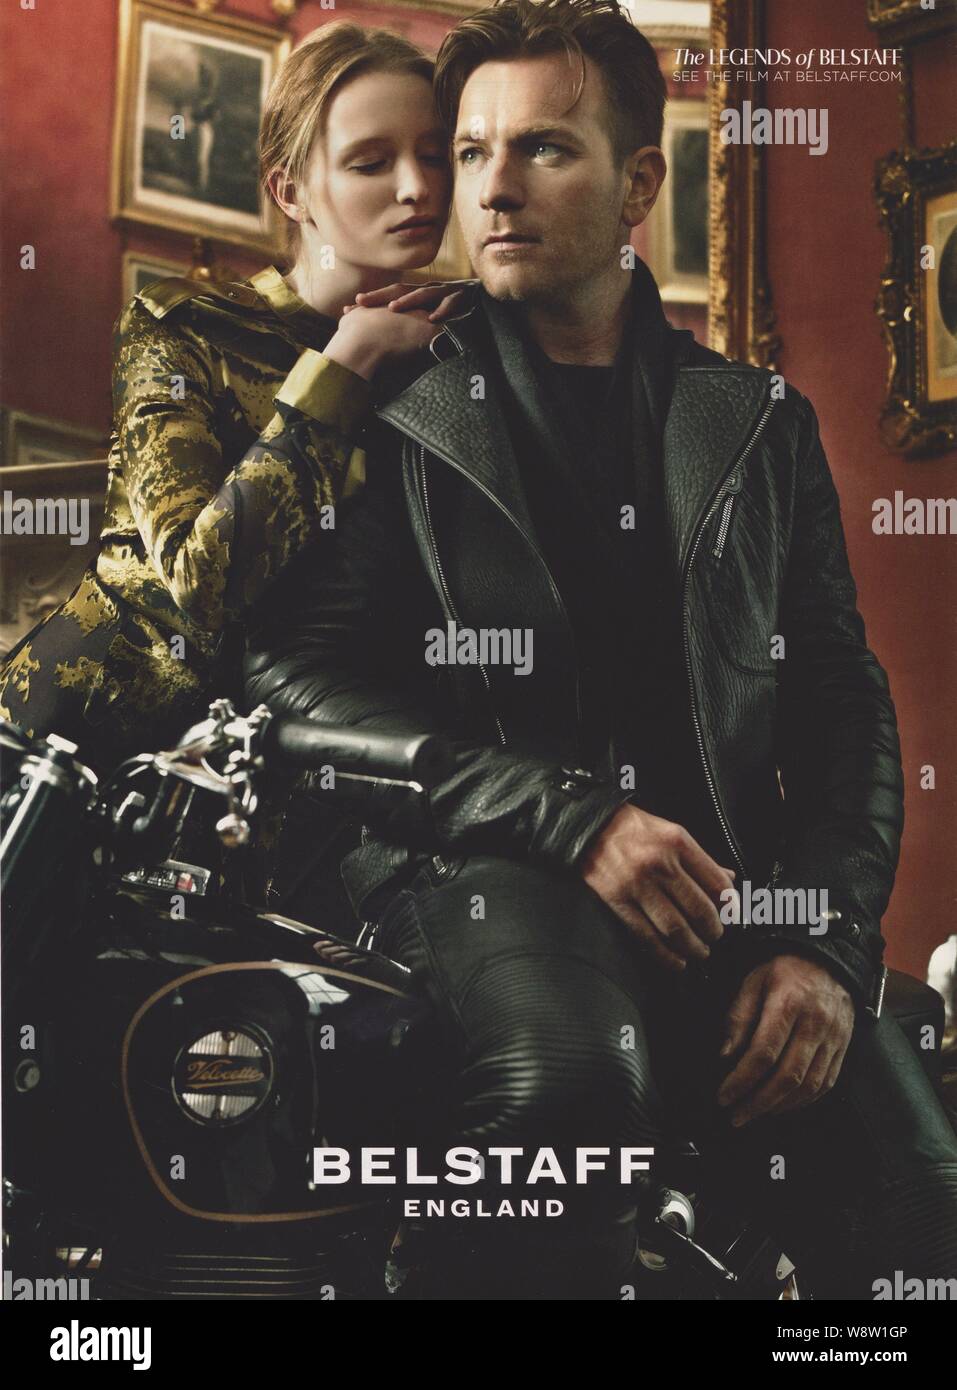 poster advertising Belstaff clothing brand with Ewan McGregor in paper  magazine from 2012 year, advertisement, creative Belstaff advert from 2010s  Stock Photo - Alamy